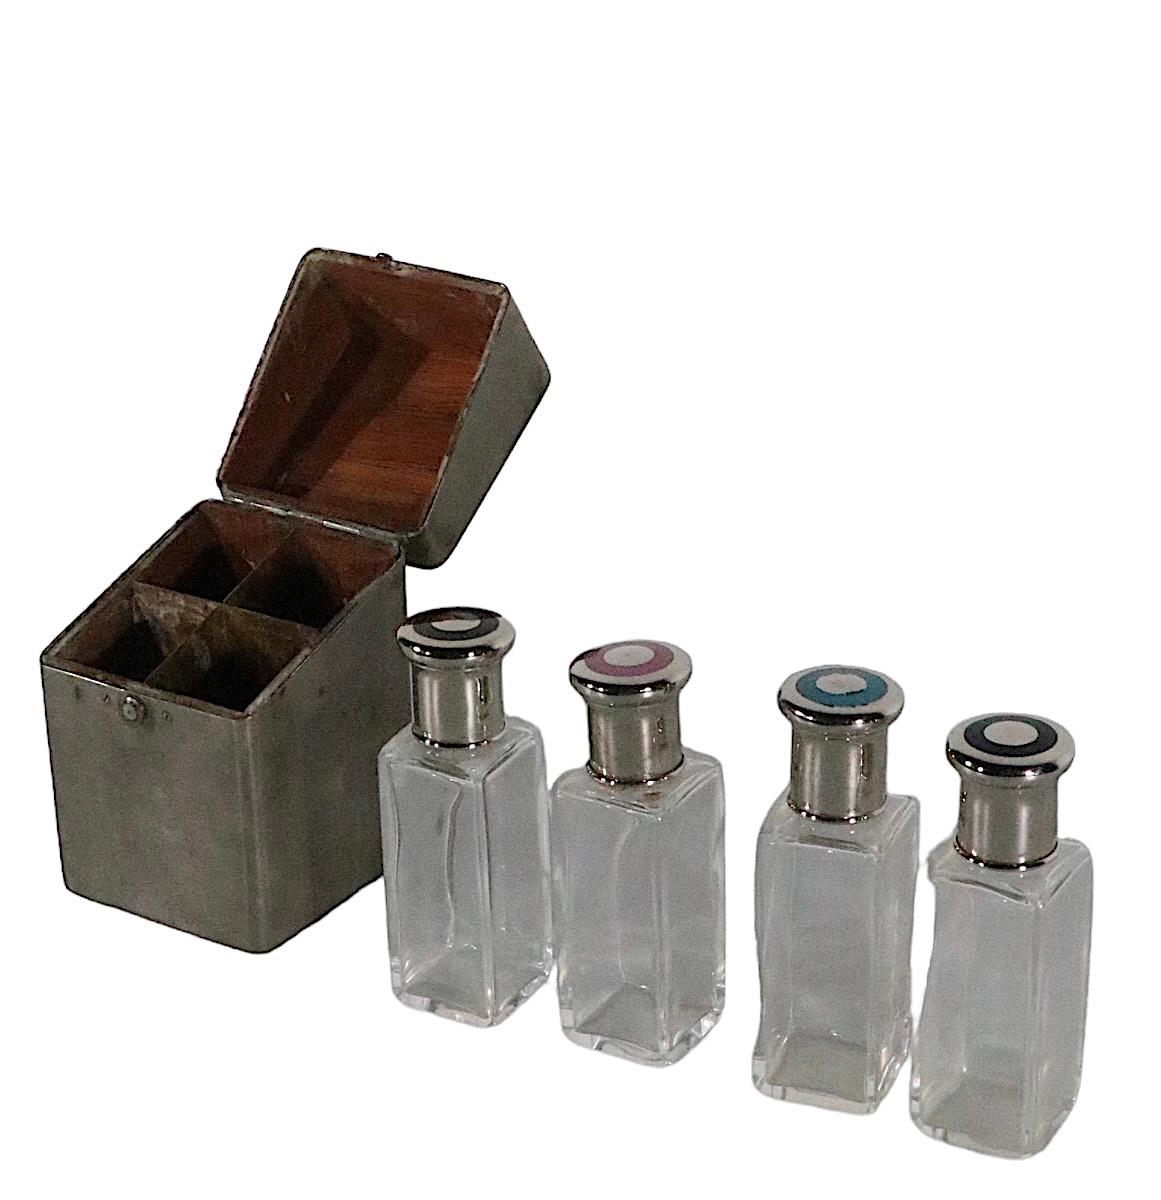 Art Deco Travel Toilet Water Perfume Bottle Caddy with Original Bottles c 1930s For Sale 5